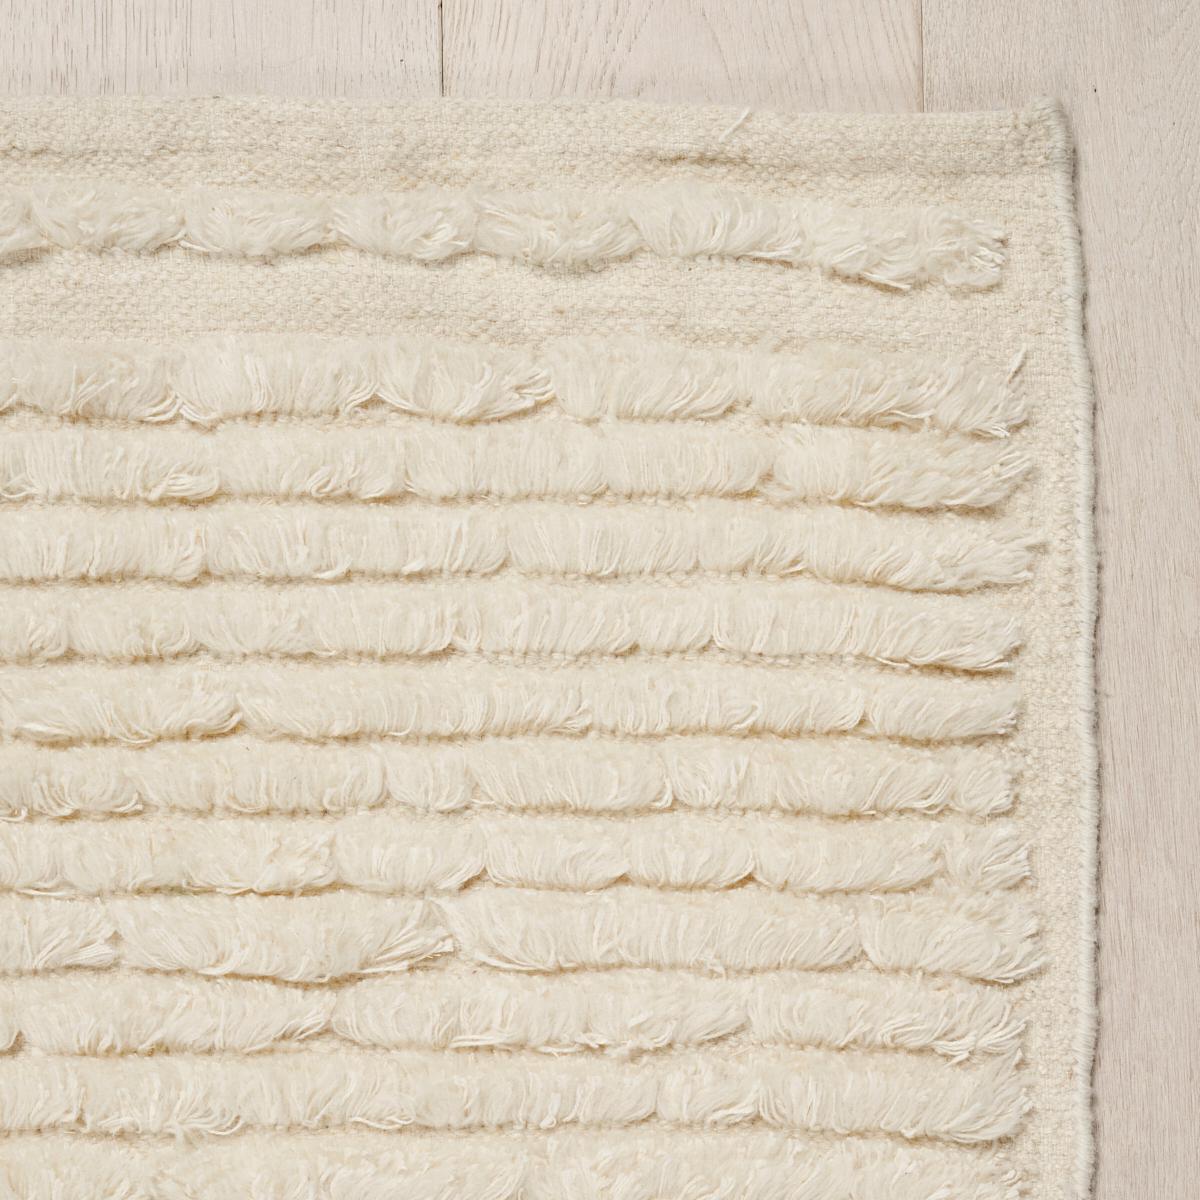 Our Cirrus Rug is a simple wool flatweave made fabulous by furry rows of fringe-like cotton-linen tufting. An understated statement piece, this unique rug adds luxurious texture to any room.
